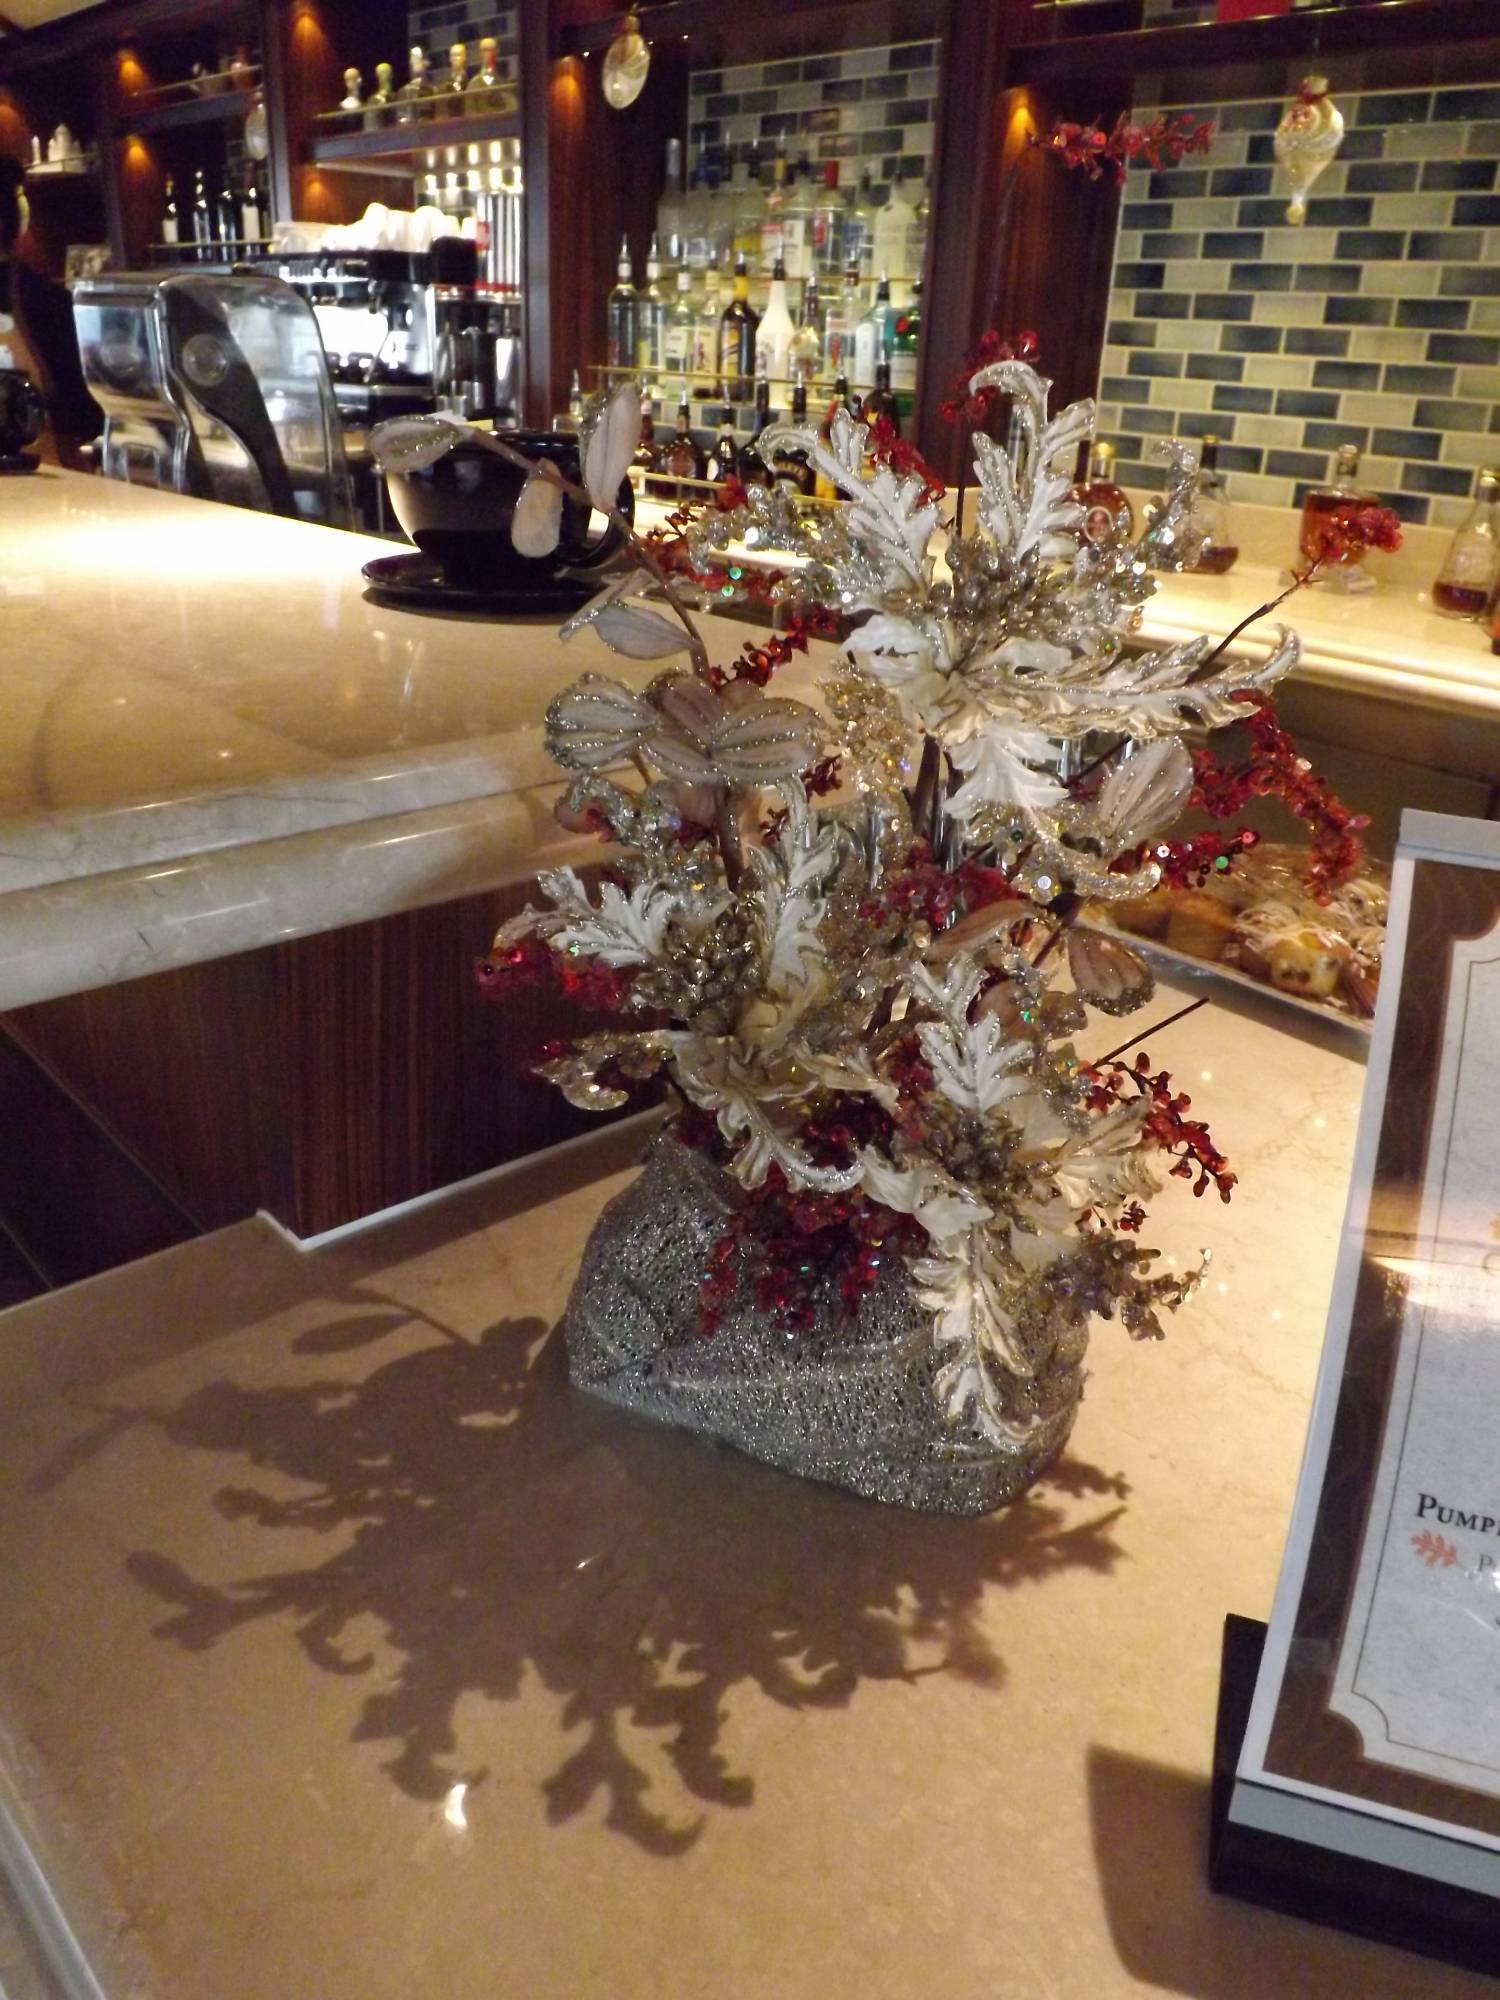 Cove Cafe - Christmas decorations